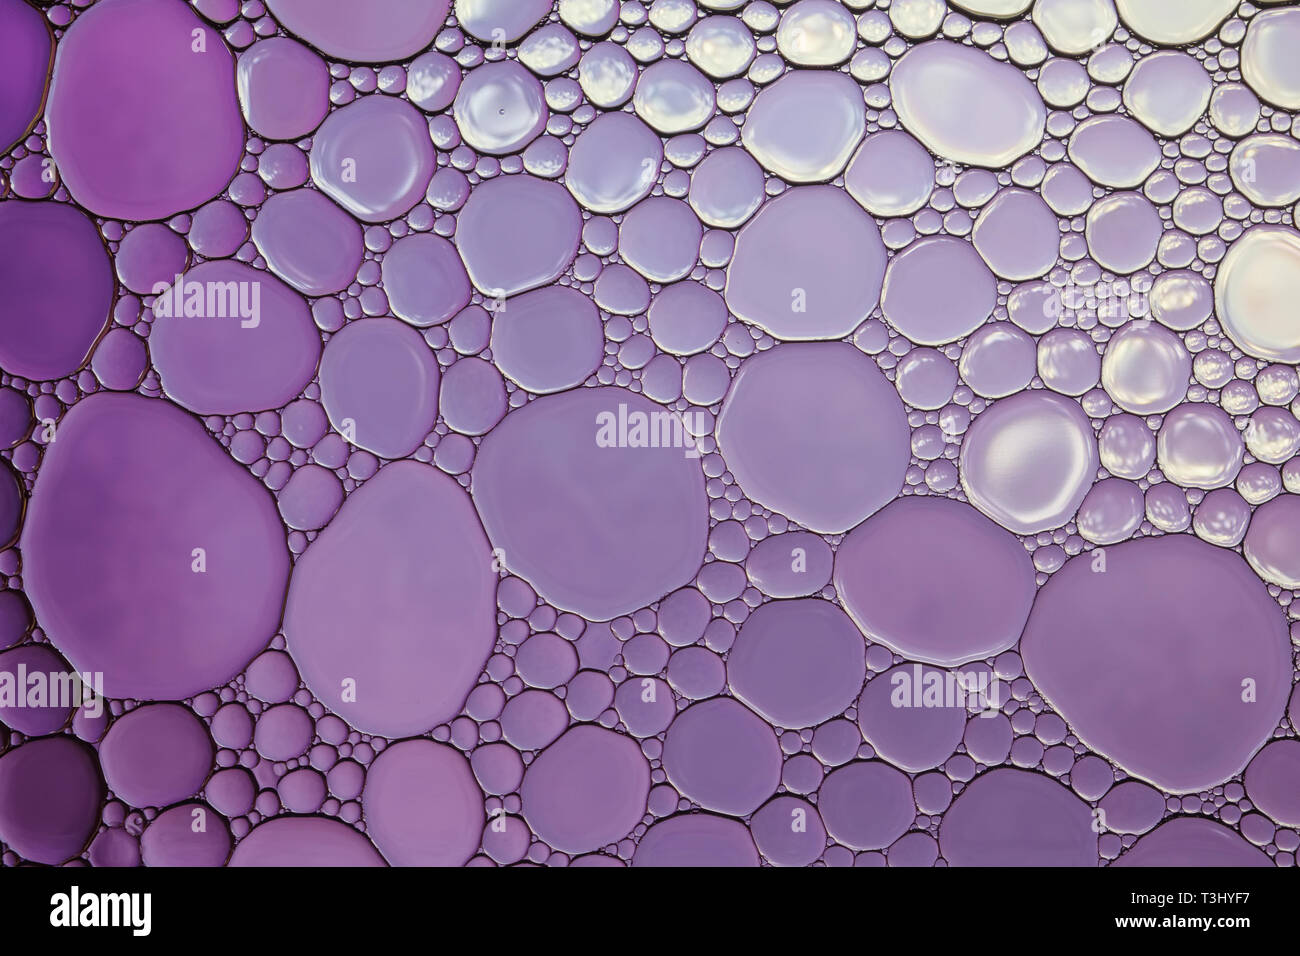 Purple abstract water drops background. Stock Photo